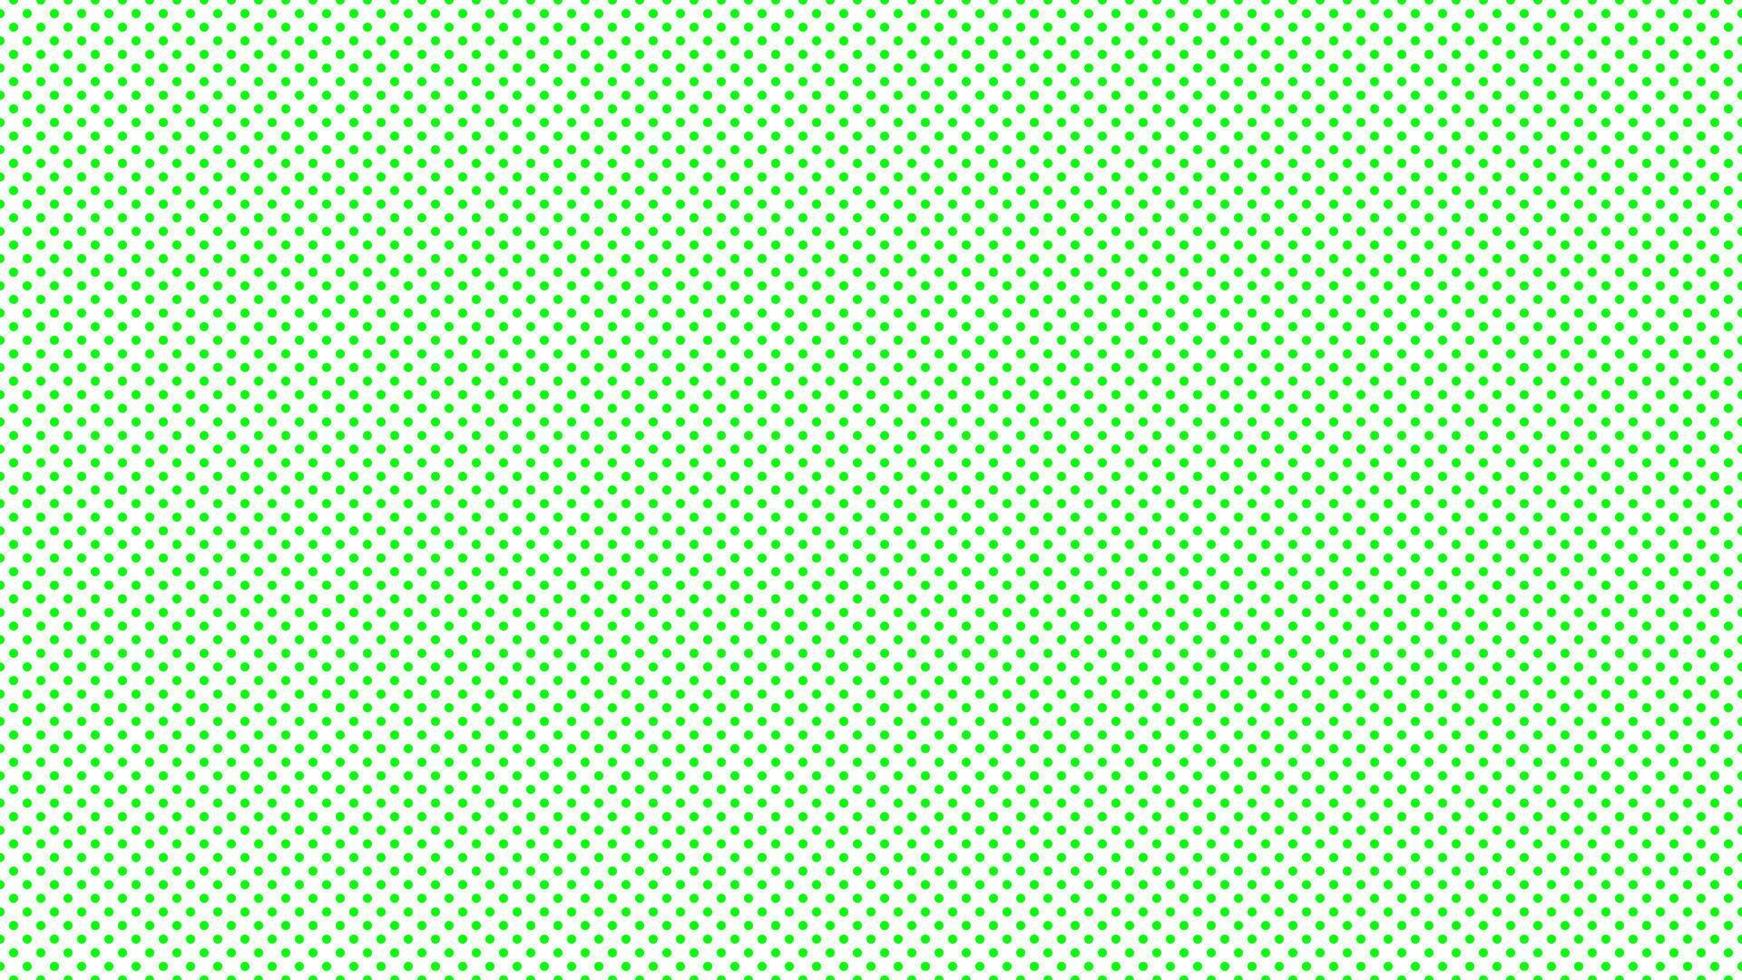 lime green color polka dots background vector